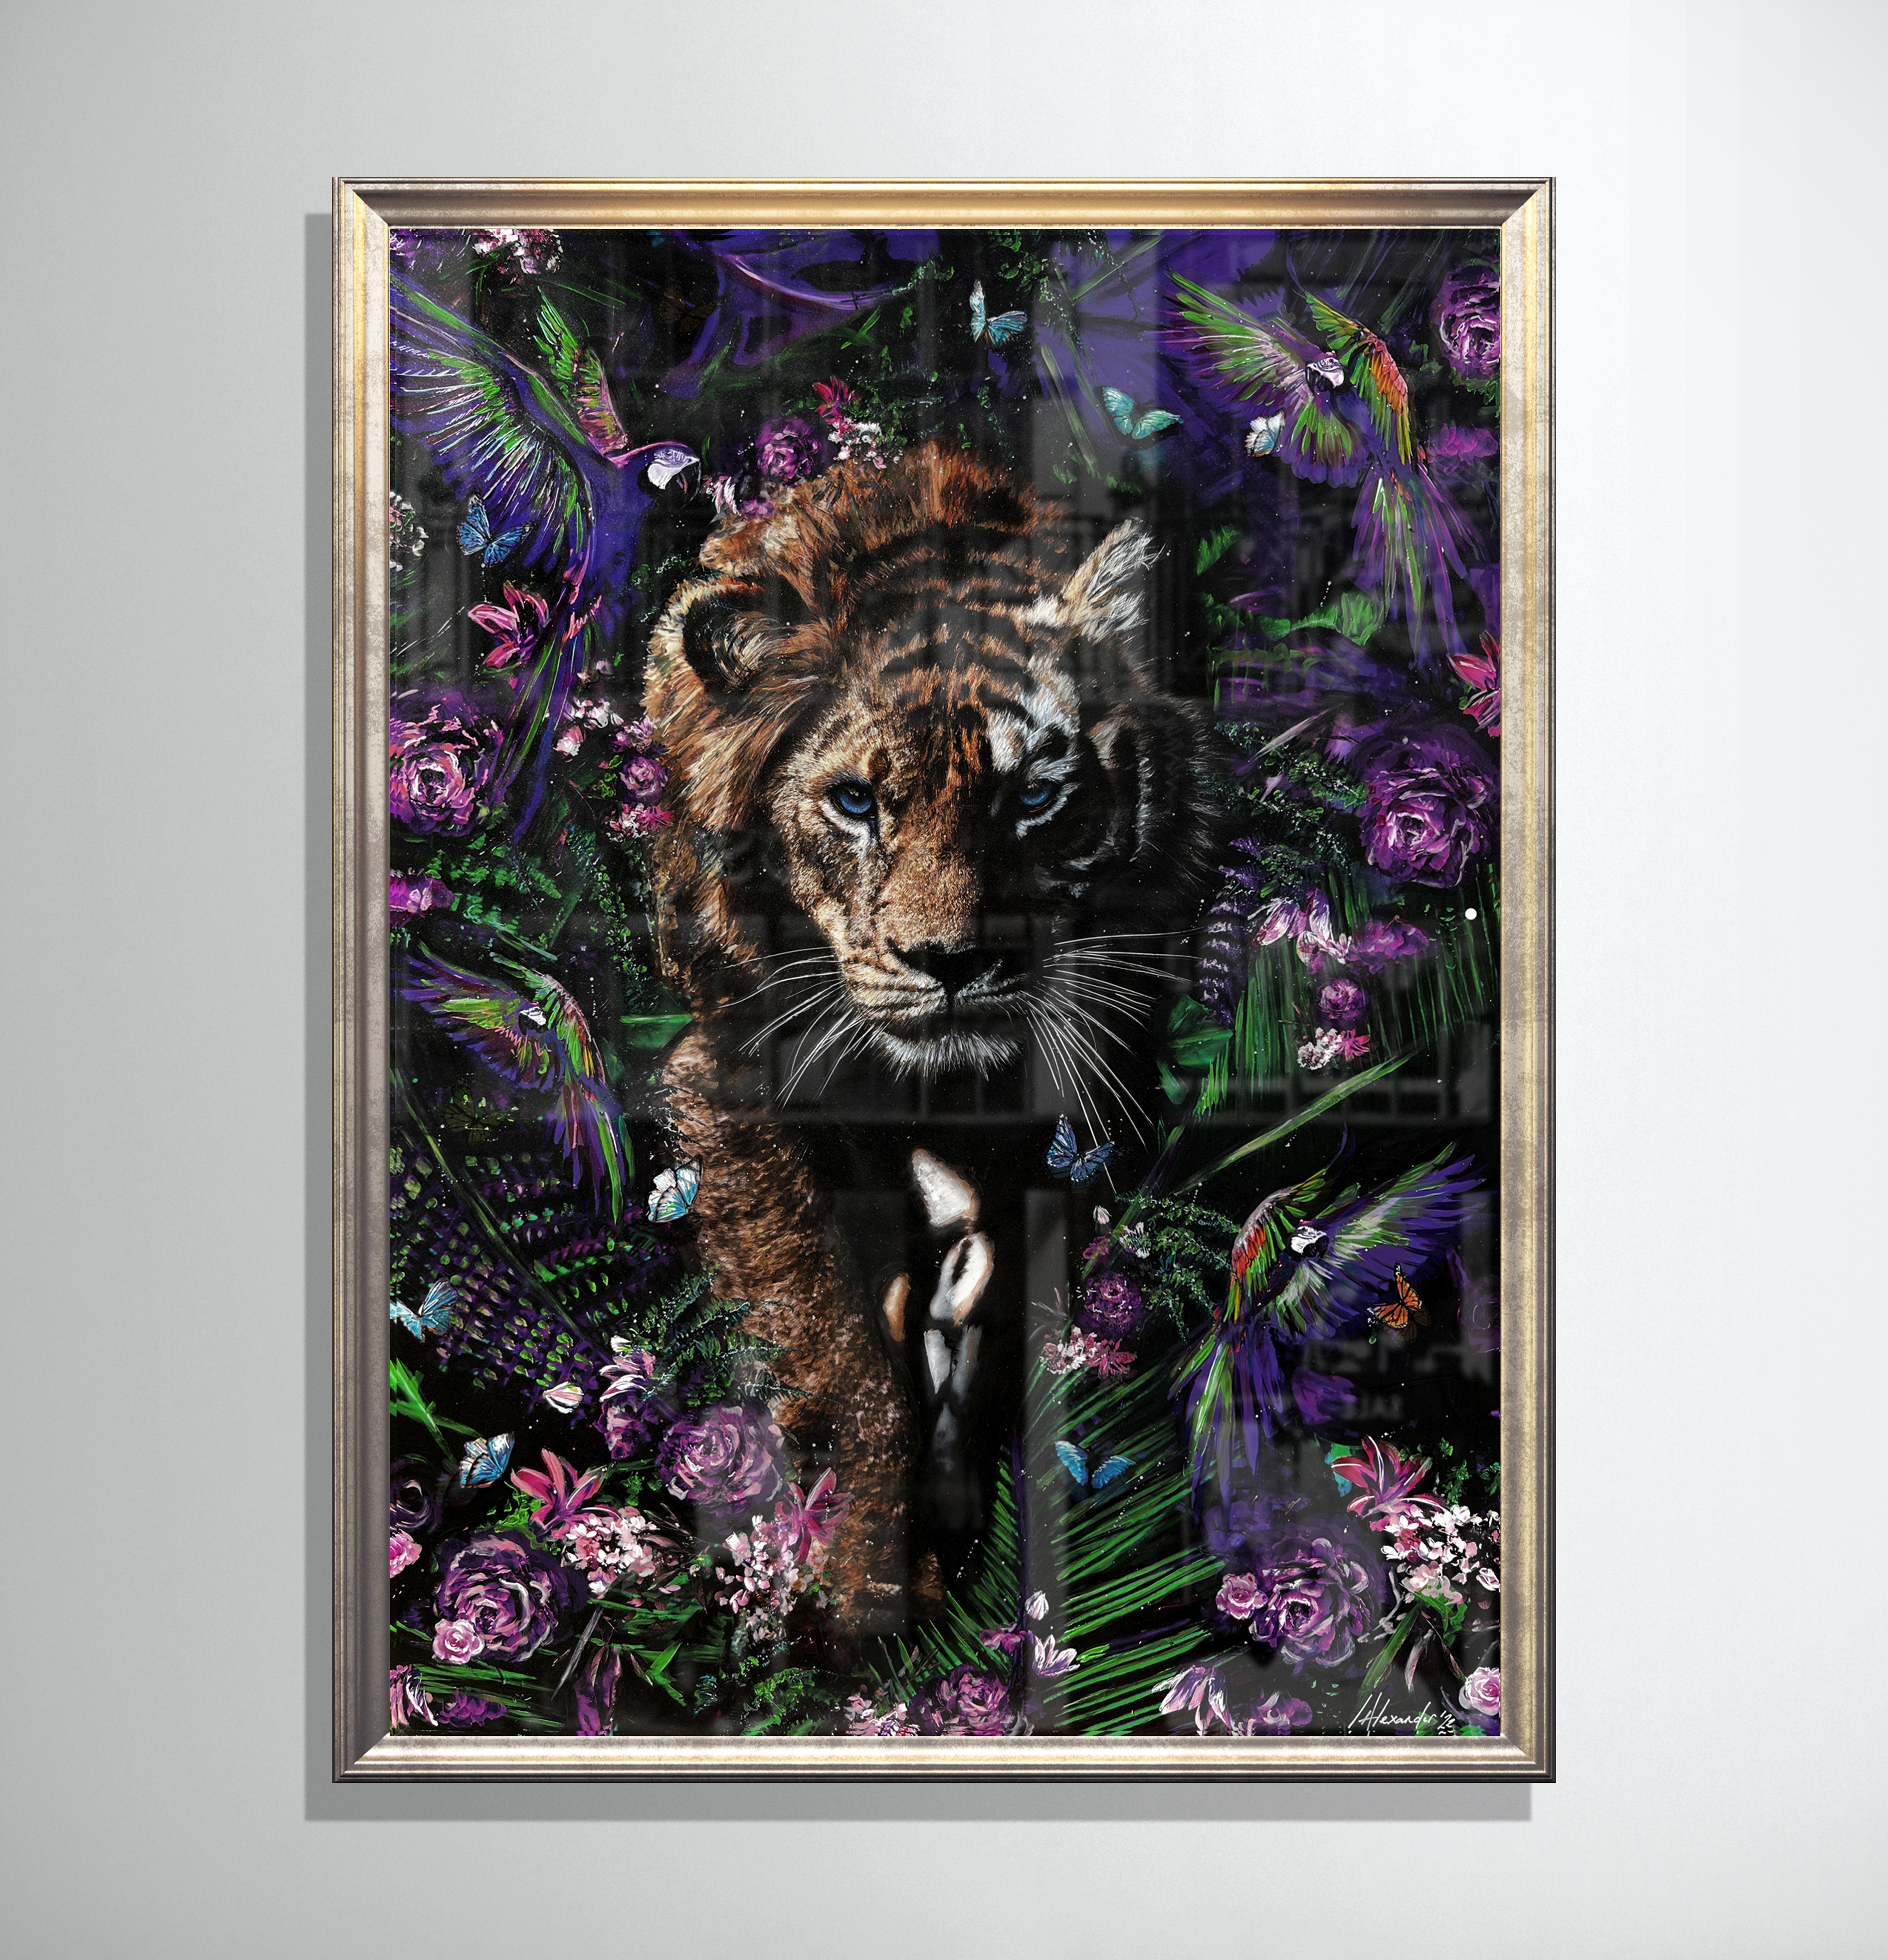 Lion X Tiger by Iain Alexander | Limited Ediiton